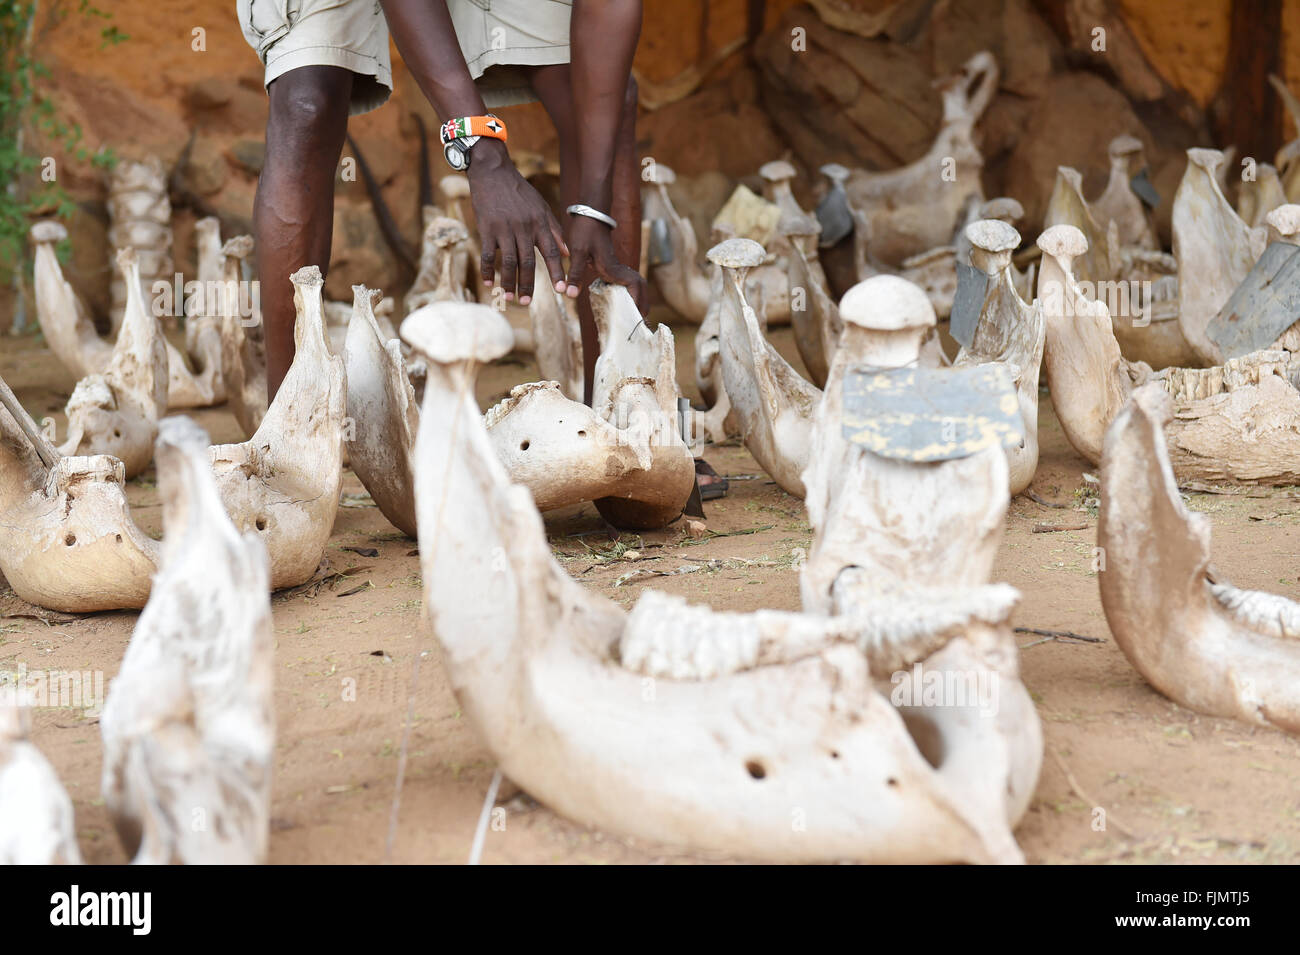 (160303) -- SAMBURU, March 3, 2016 (Xinhua) -- David from Save the Elephants presents the jaws bones of elephants that died of poaching, at STE camp in Samburu National Reserve, Kenya, March 1, 2016. In northern Kenya's Samburu region, there lives the second largest group of elephant species in this country. Around them, a number of elephant defenders have watched them day and night for the past 18 years. Founded in 1993, the organization Save The Elephants (STE) has been devoting its attention to secure the future of elephants and battle the ivory poaching. The World Wildlife Day is observed  Stock Photo